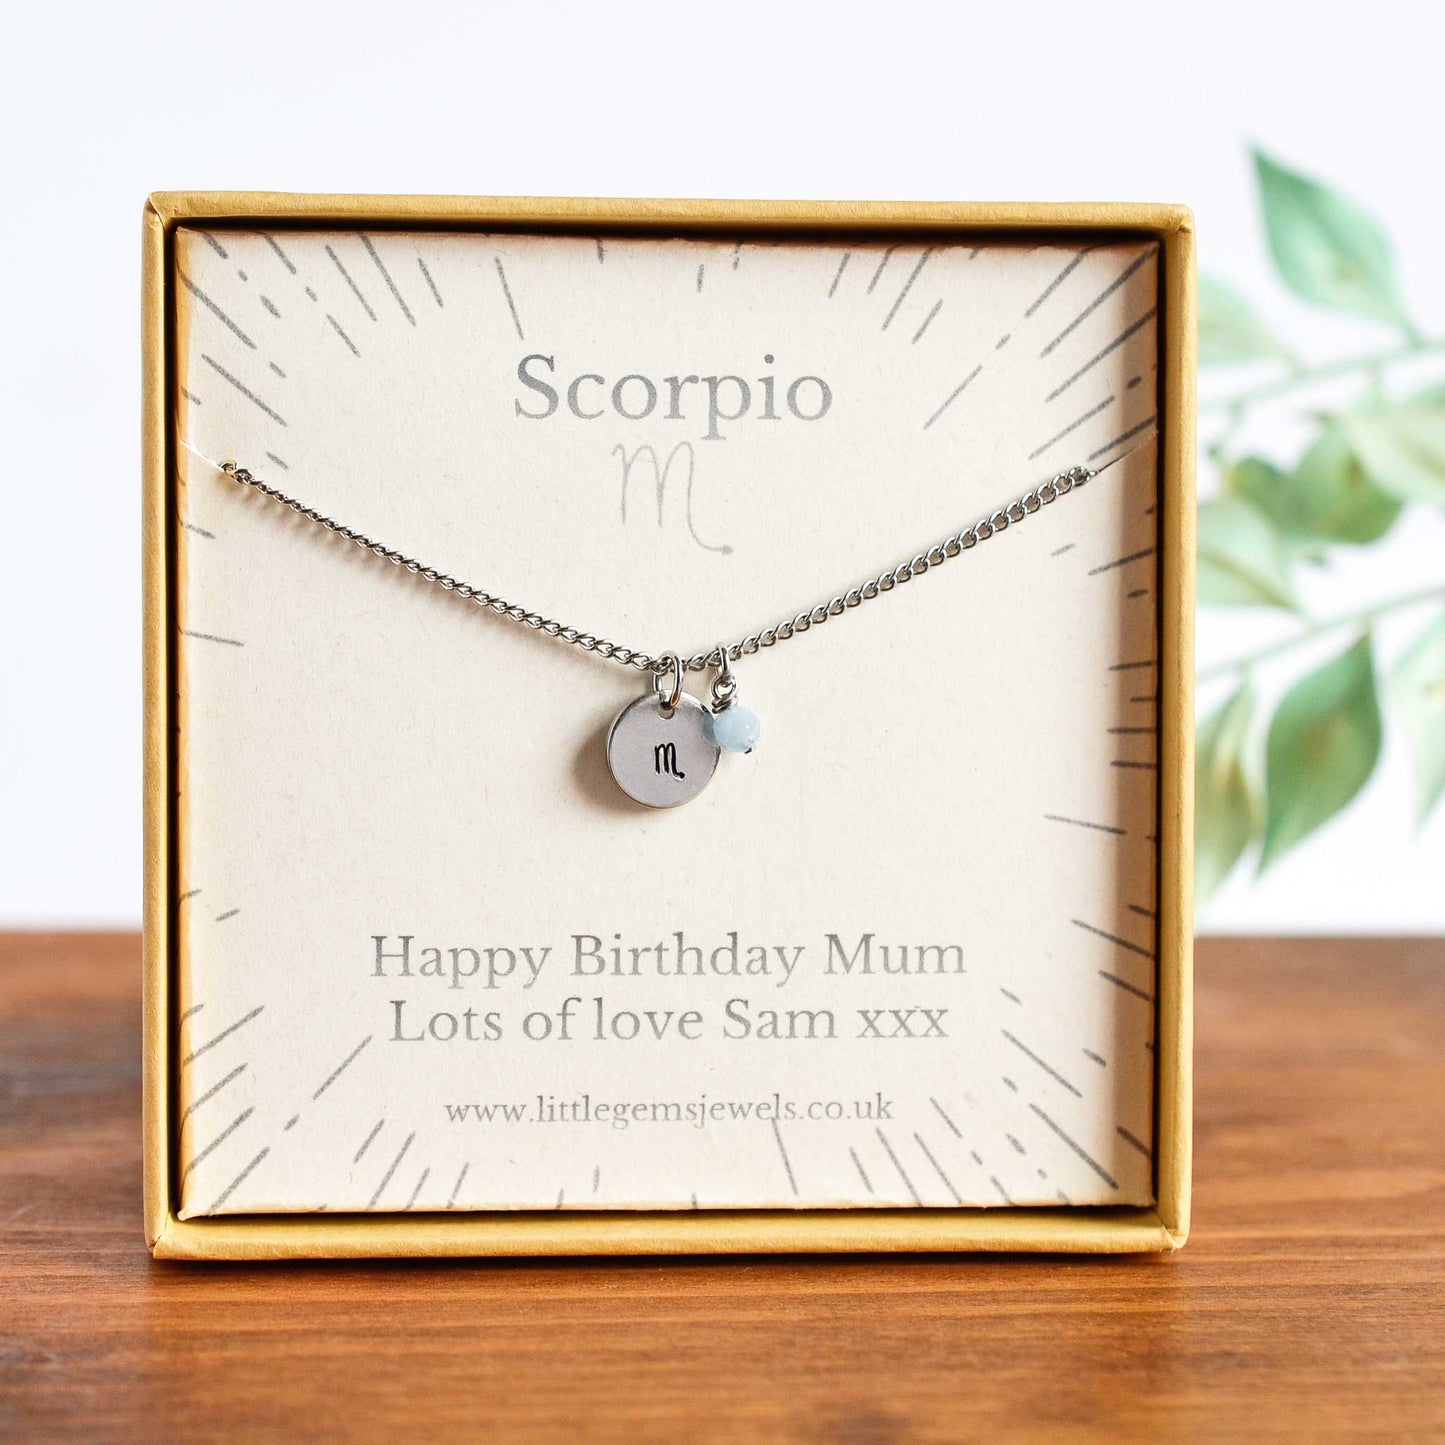 Scorpio Zodiac necklace with personalised gift message in eco friendly gift box